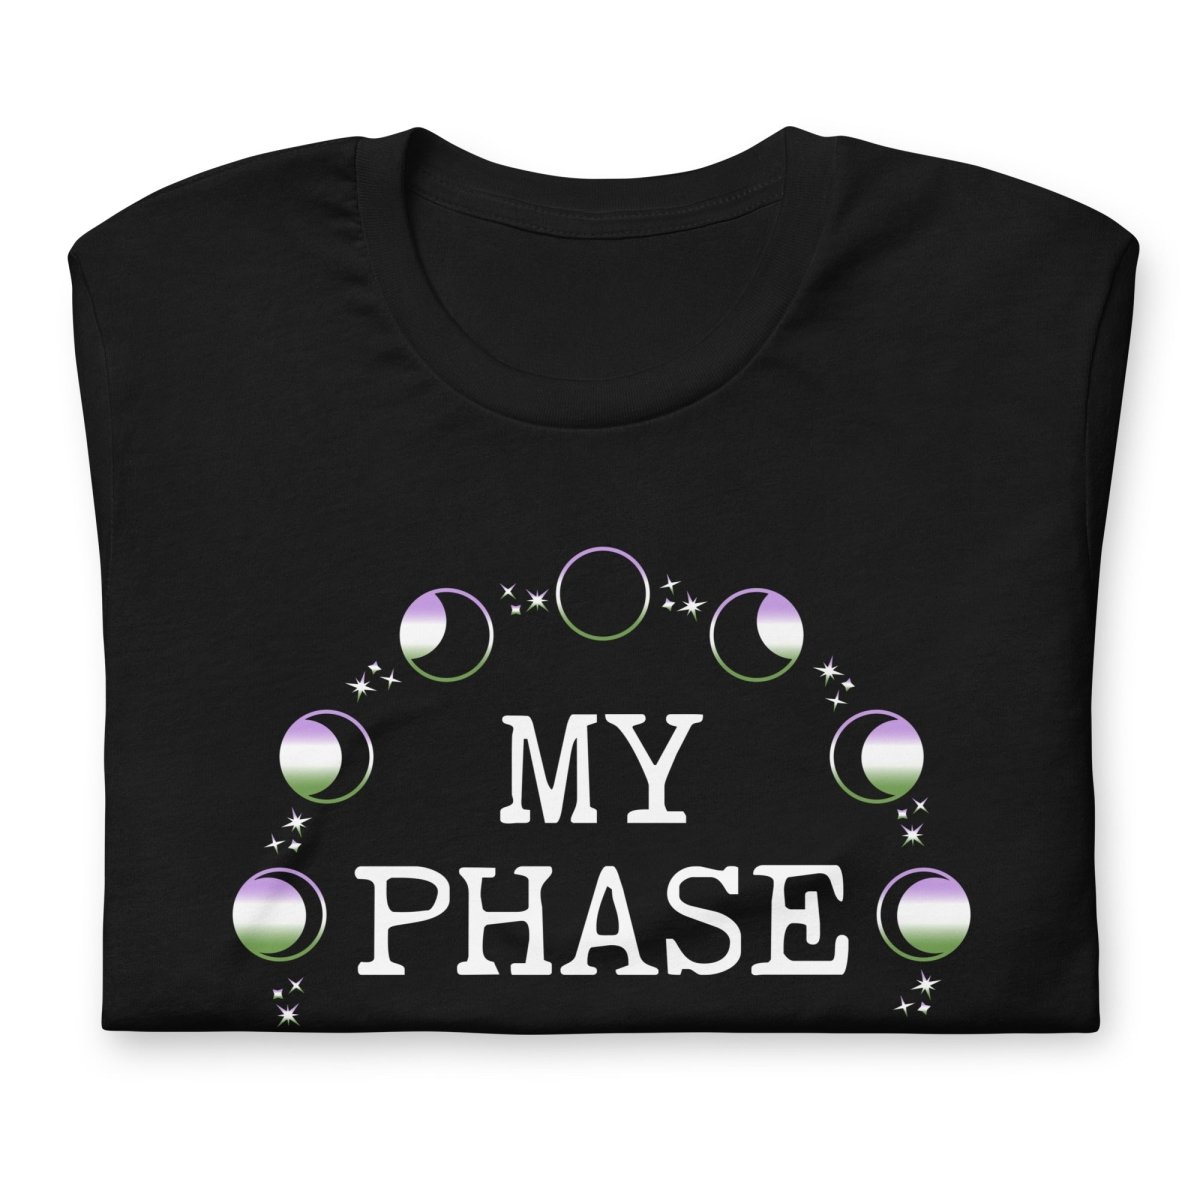 Genderqueer Moon Phase Shirt - On Trend Shirts